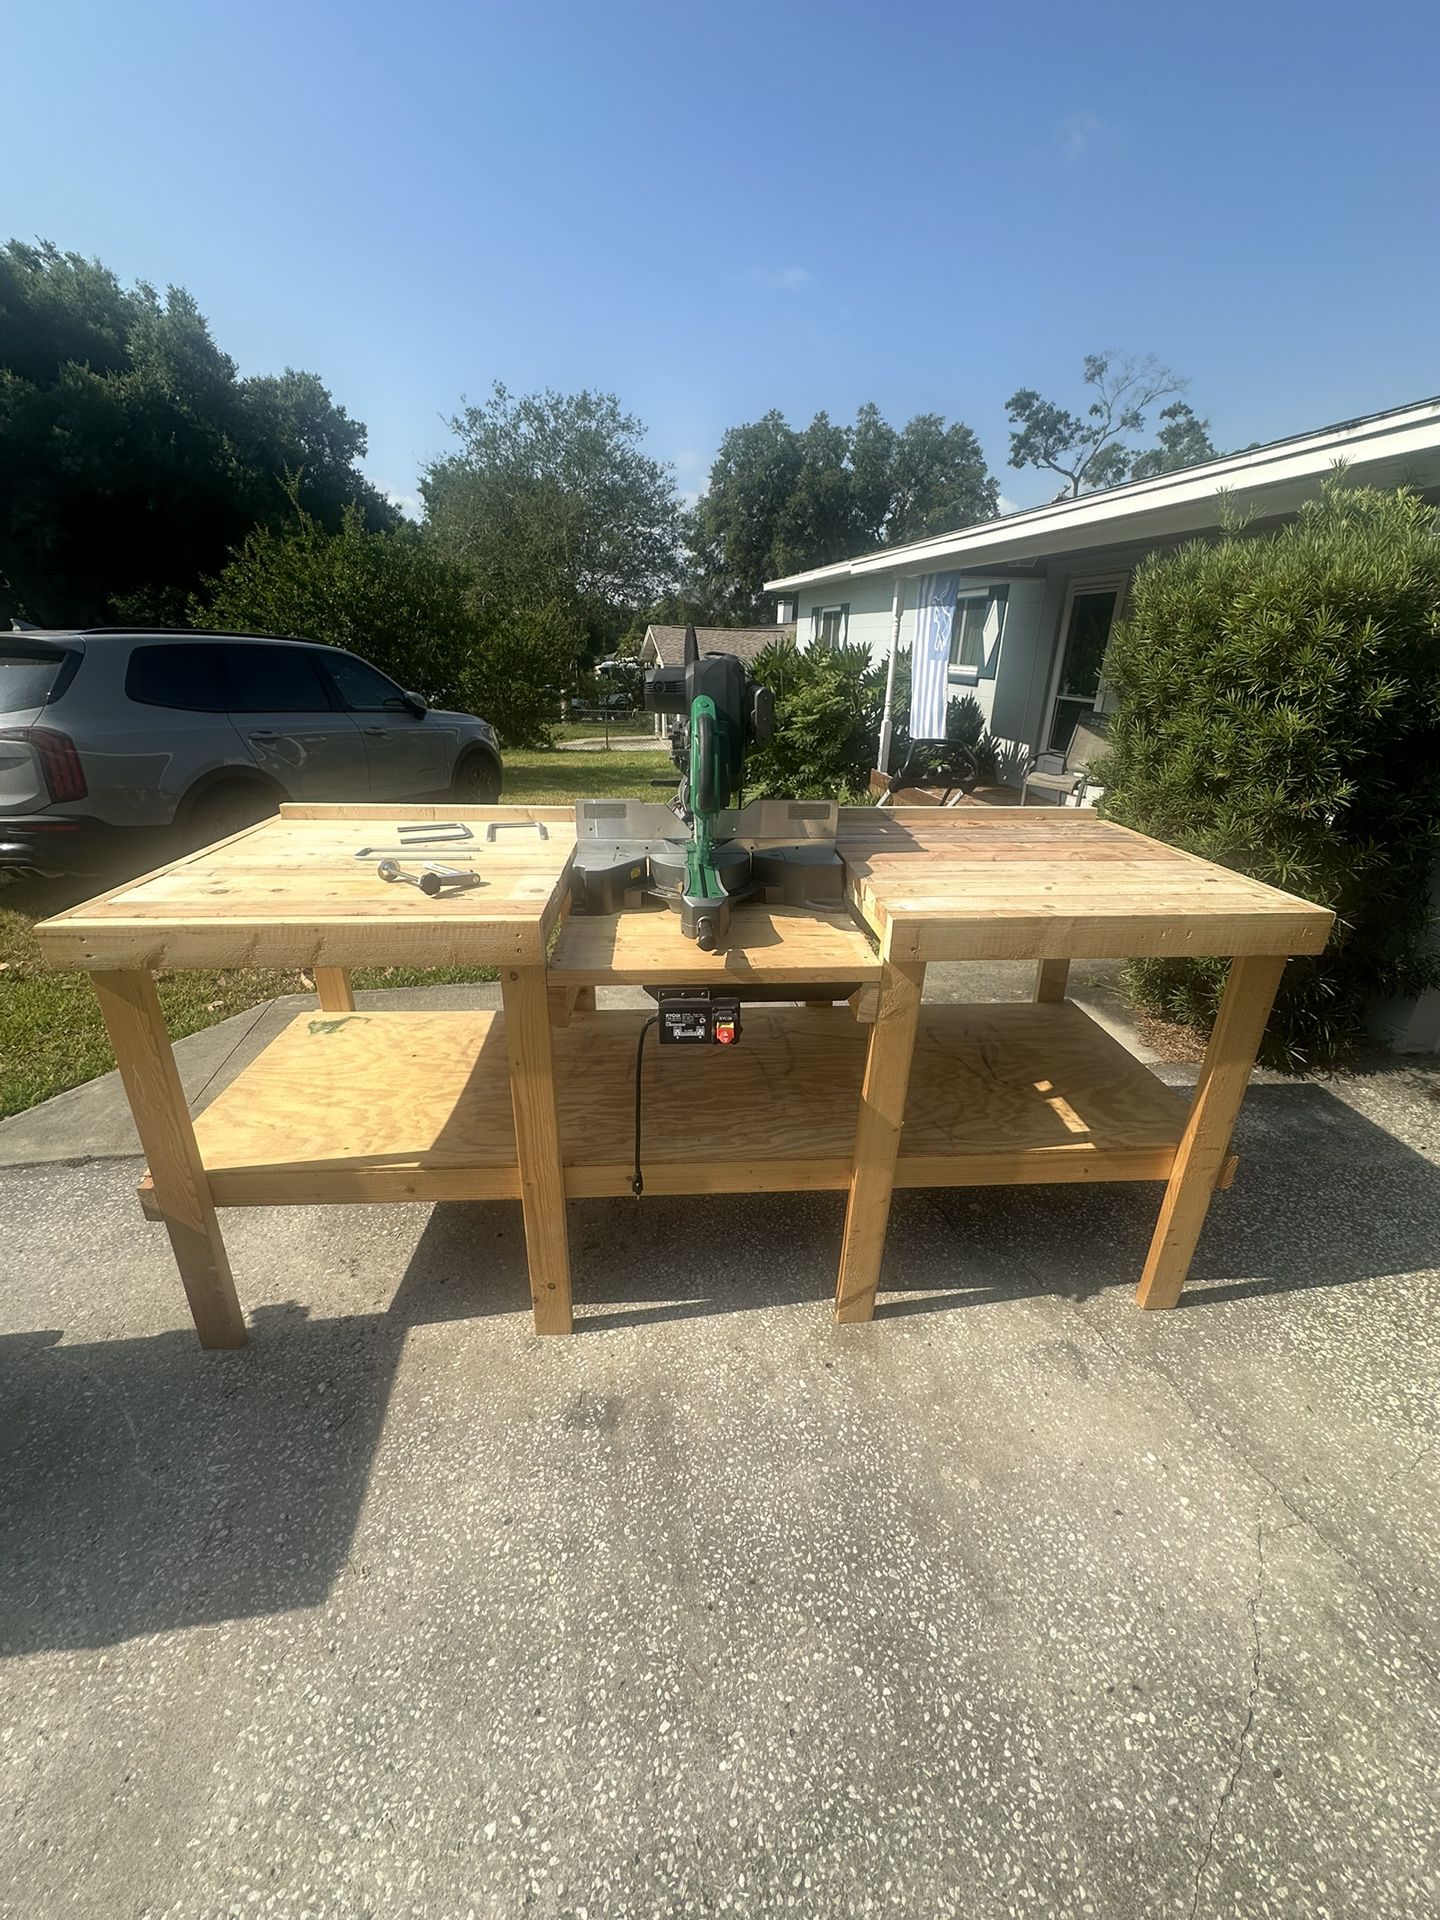 Miter Saw, Table Saw And Work Bench